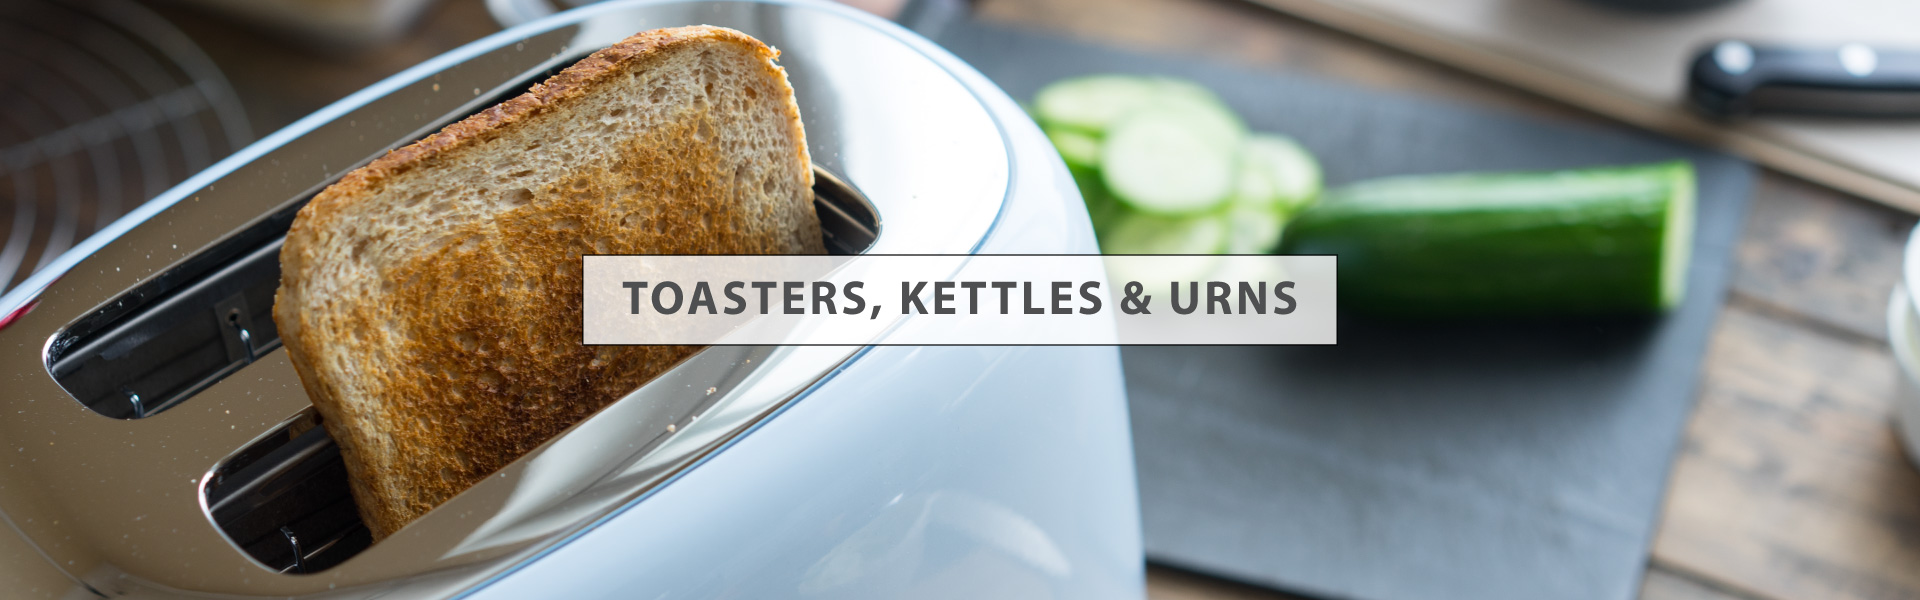 TOASTERS KETTLES & URNS